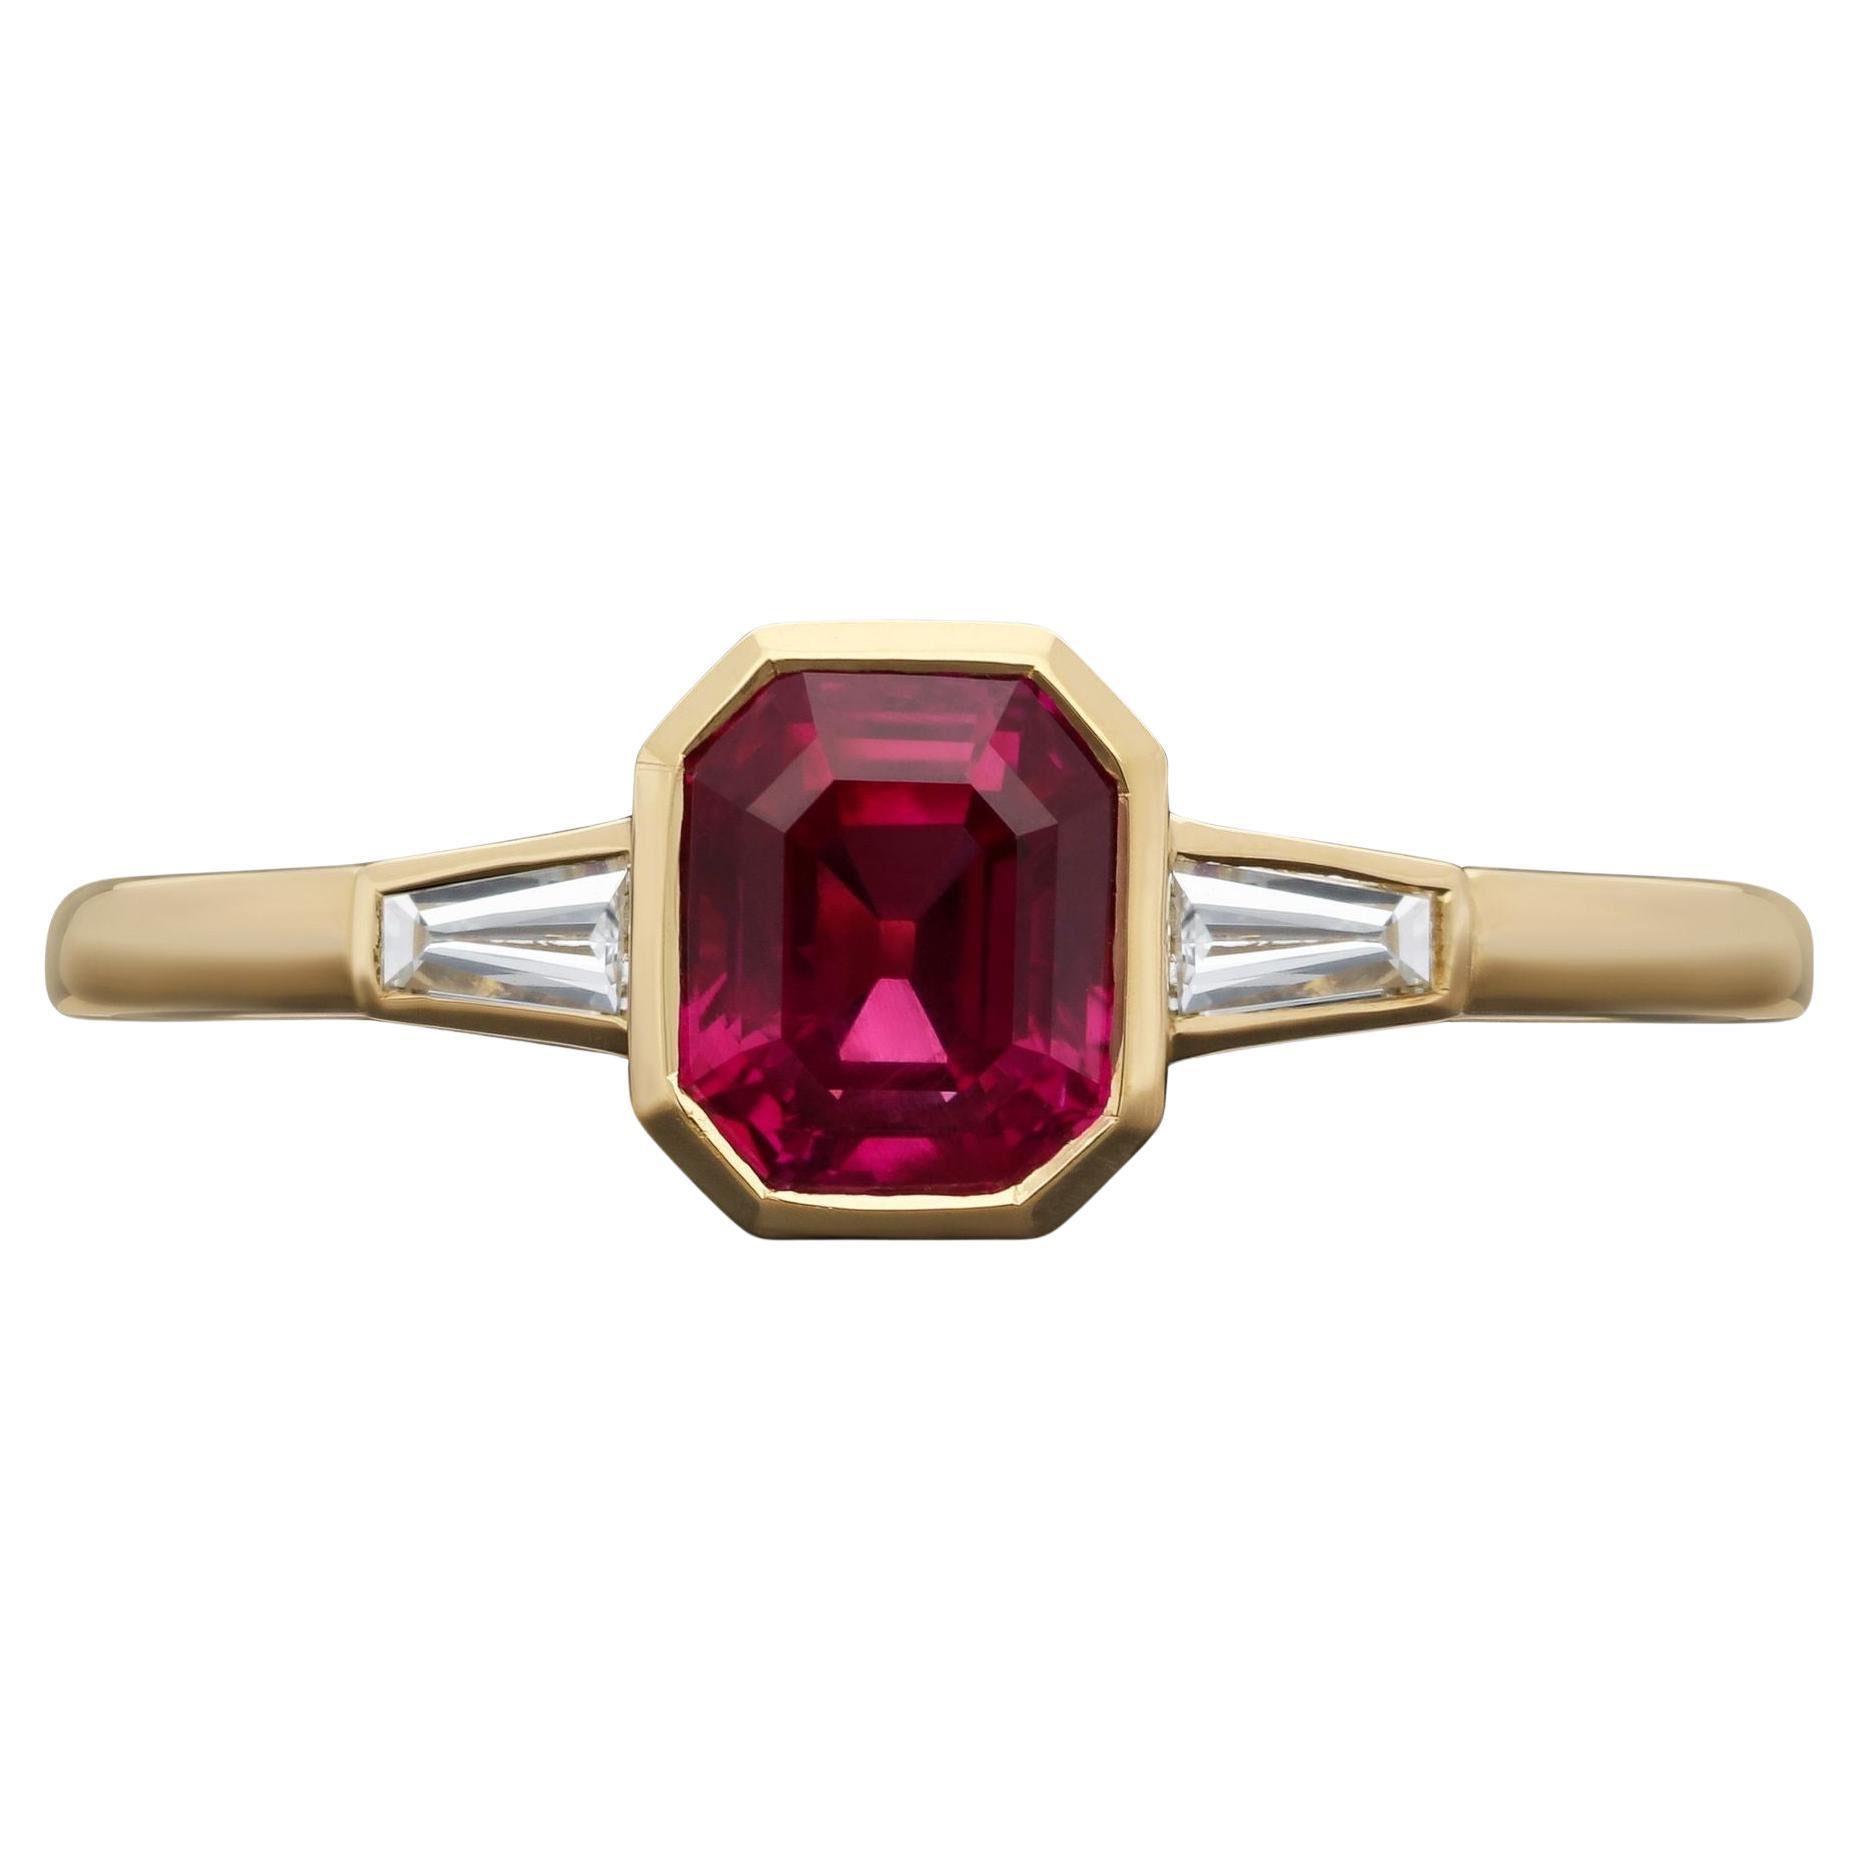 Hancocks 1.09ct Burmese Ruby Ring With Baguette Diamond Shoulders Contemporary